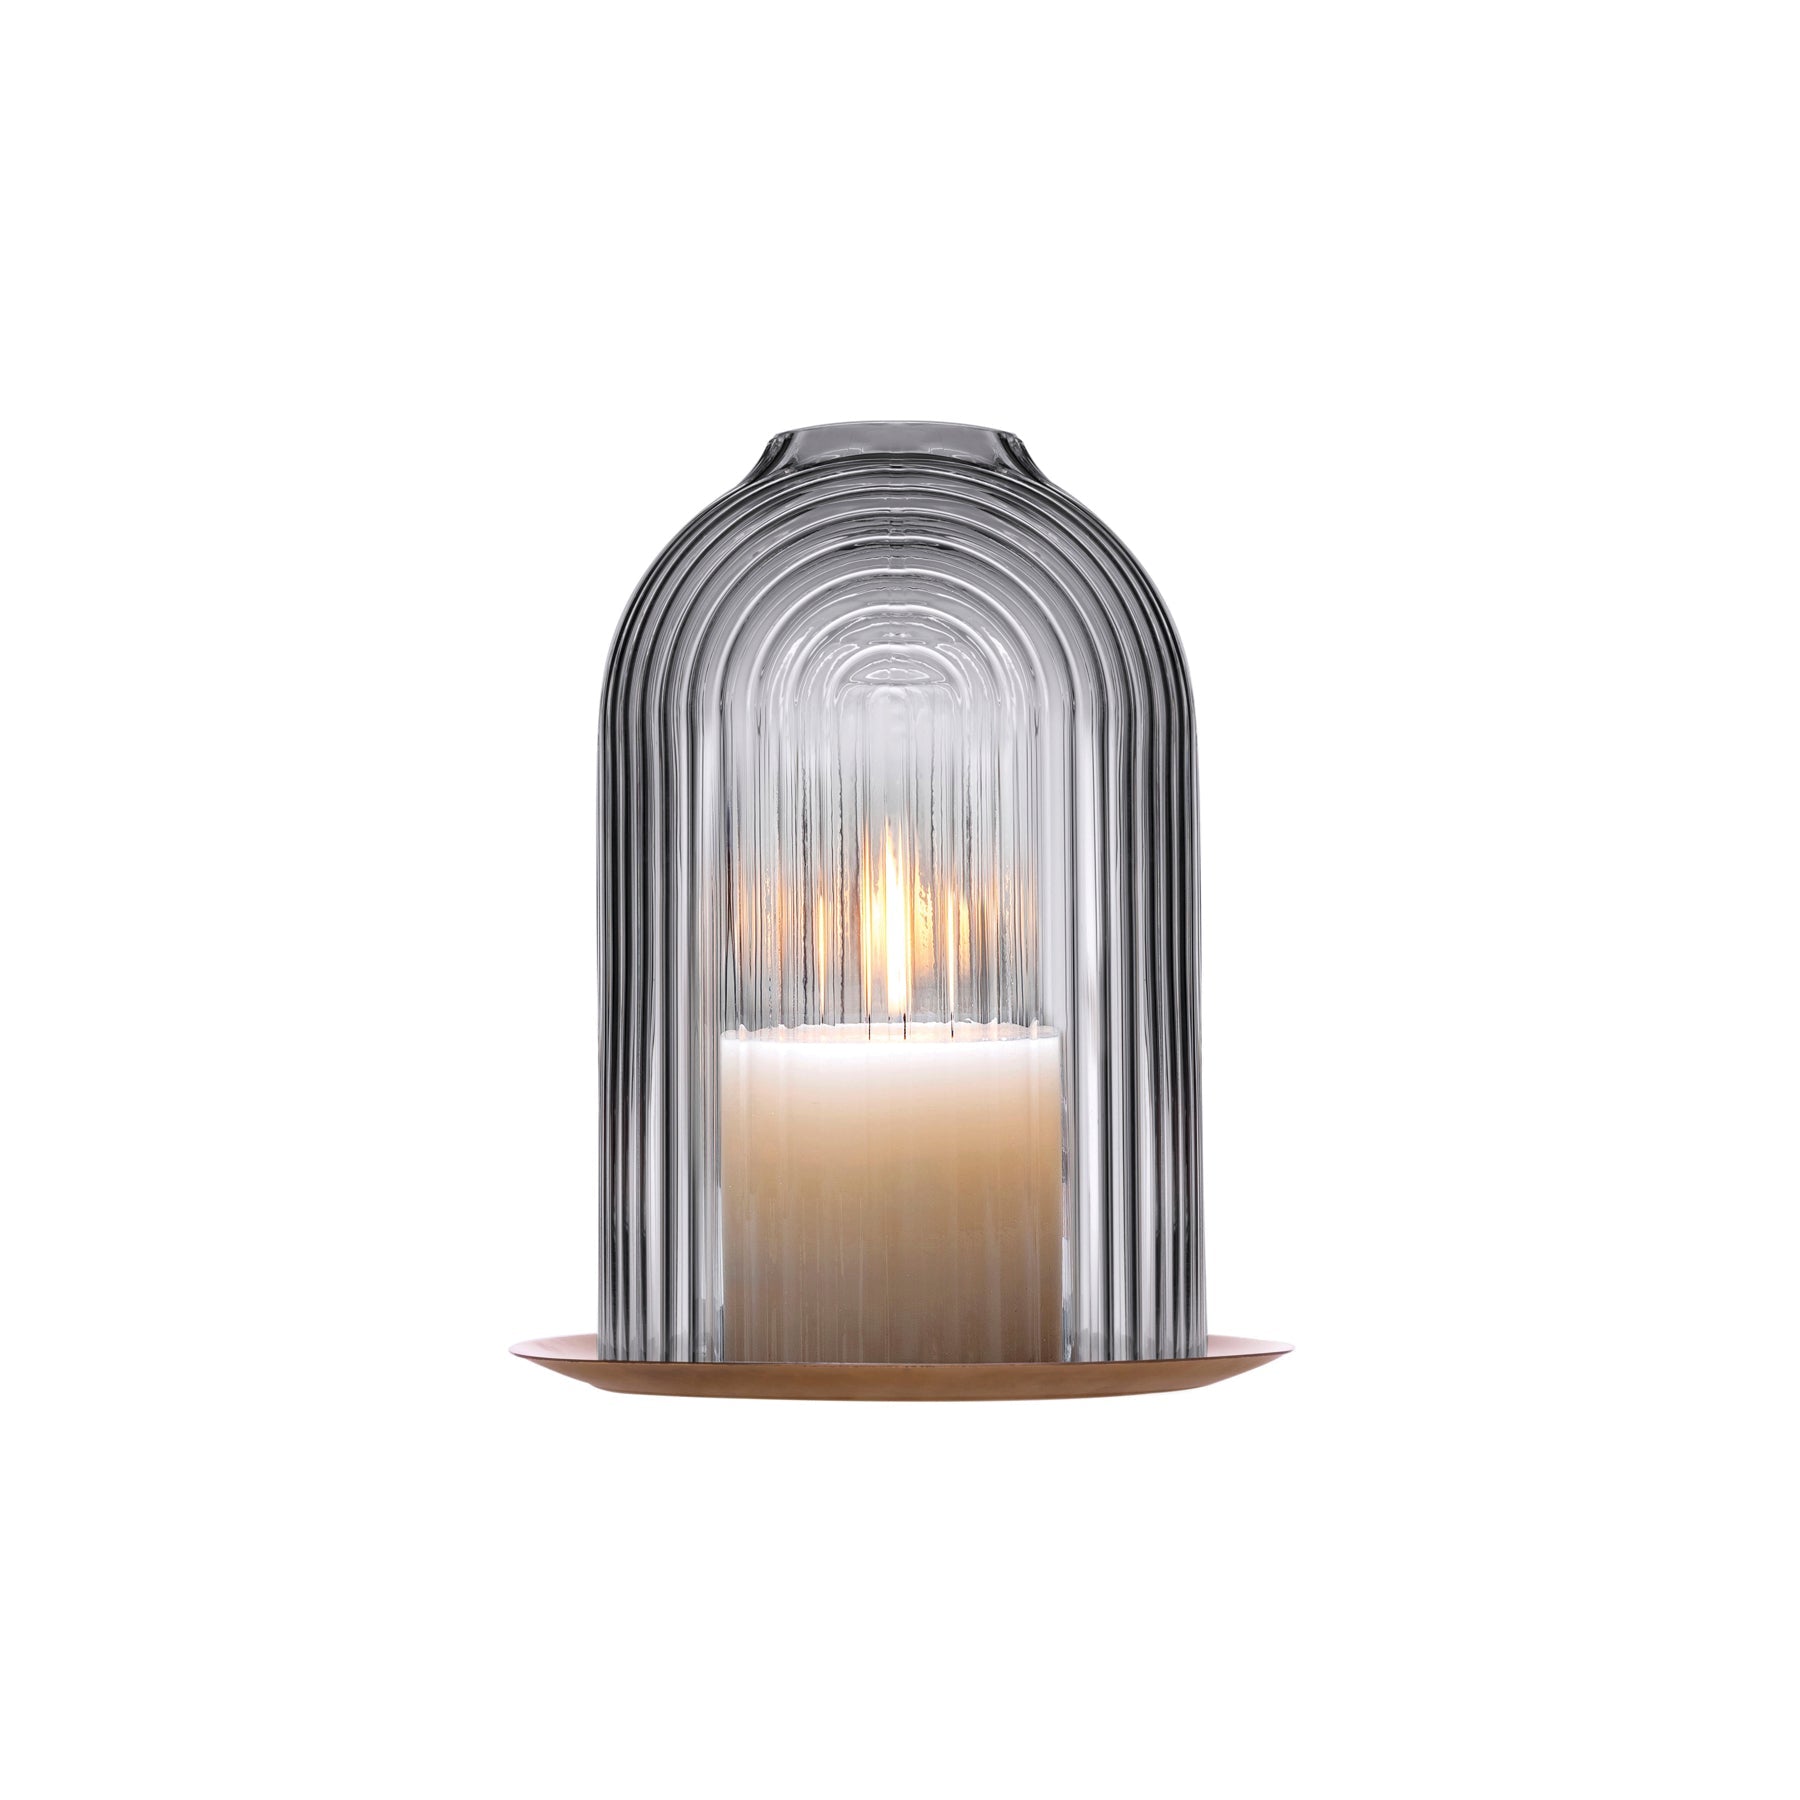 Lead-free crystal candle holder Ilo in small, a dome shaped candle holder with rippled glass effect, with candle presented on white background